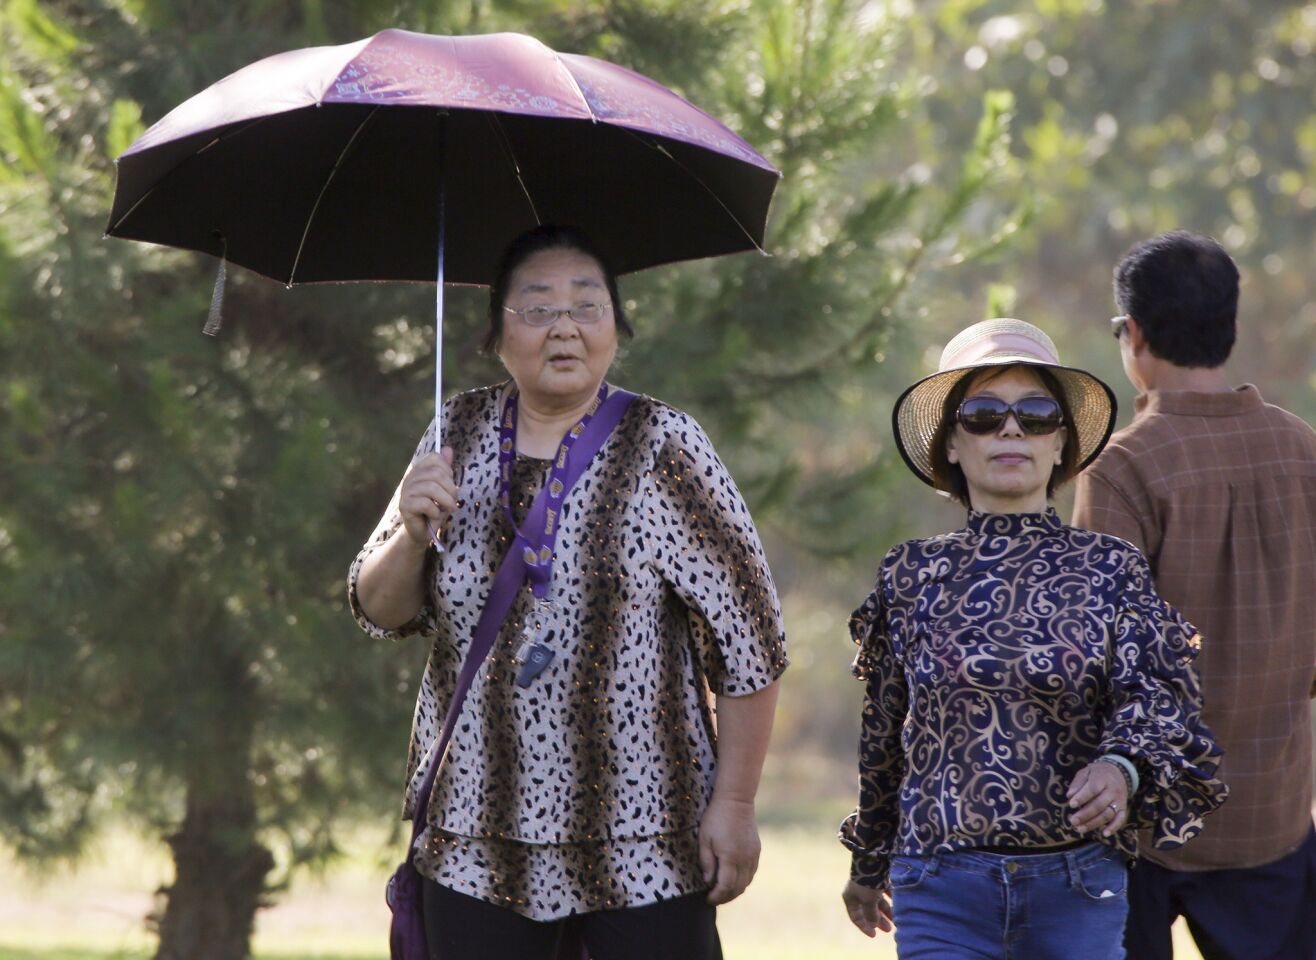 Umbrellas are required equipment while walking around Vincent Lugo Park as temperatures rise during the latest heat wave.